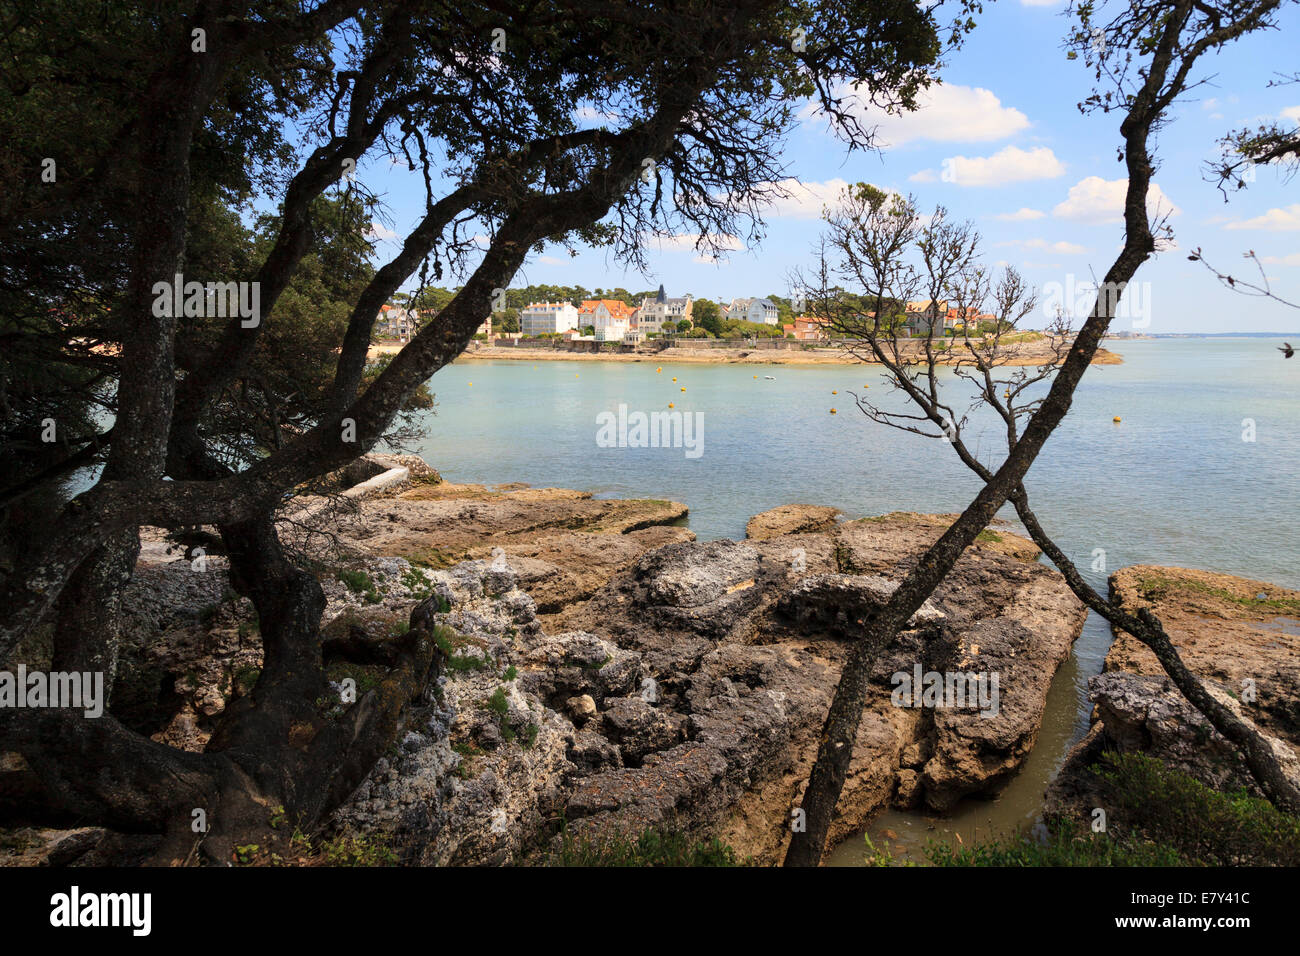 Worn calcareous rocks and trees frame the bay of Saint Palais France. Stock Photo